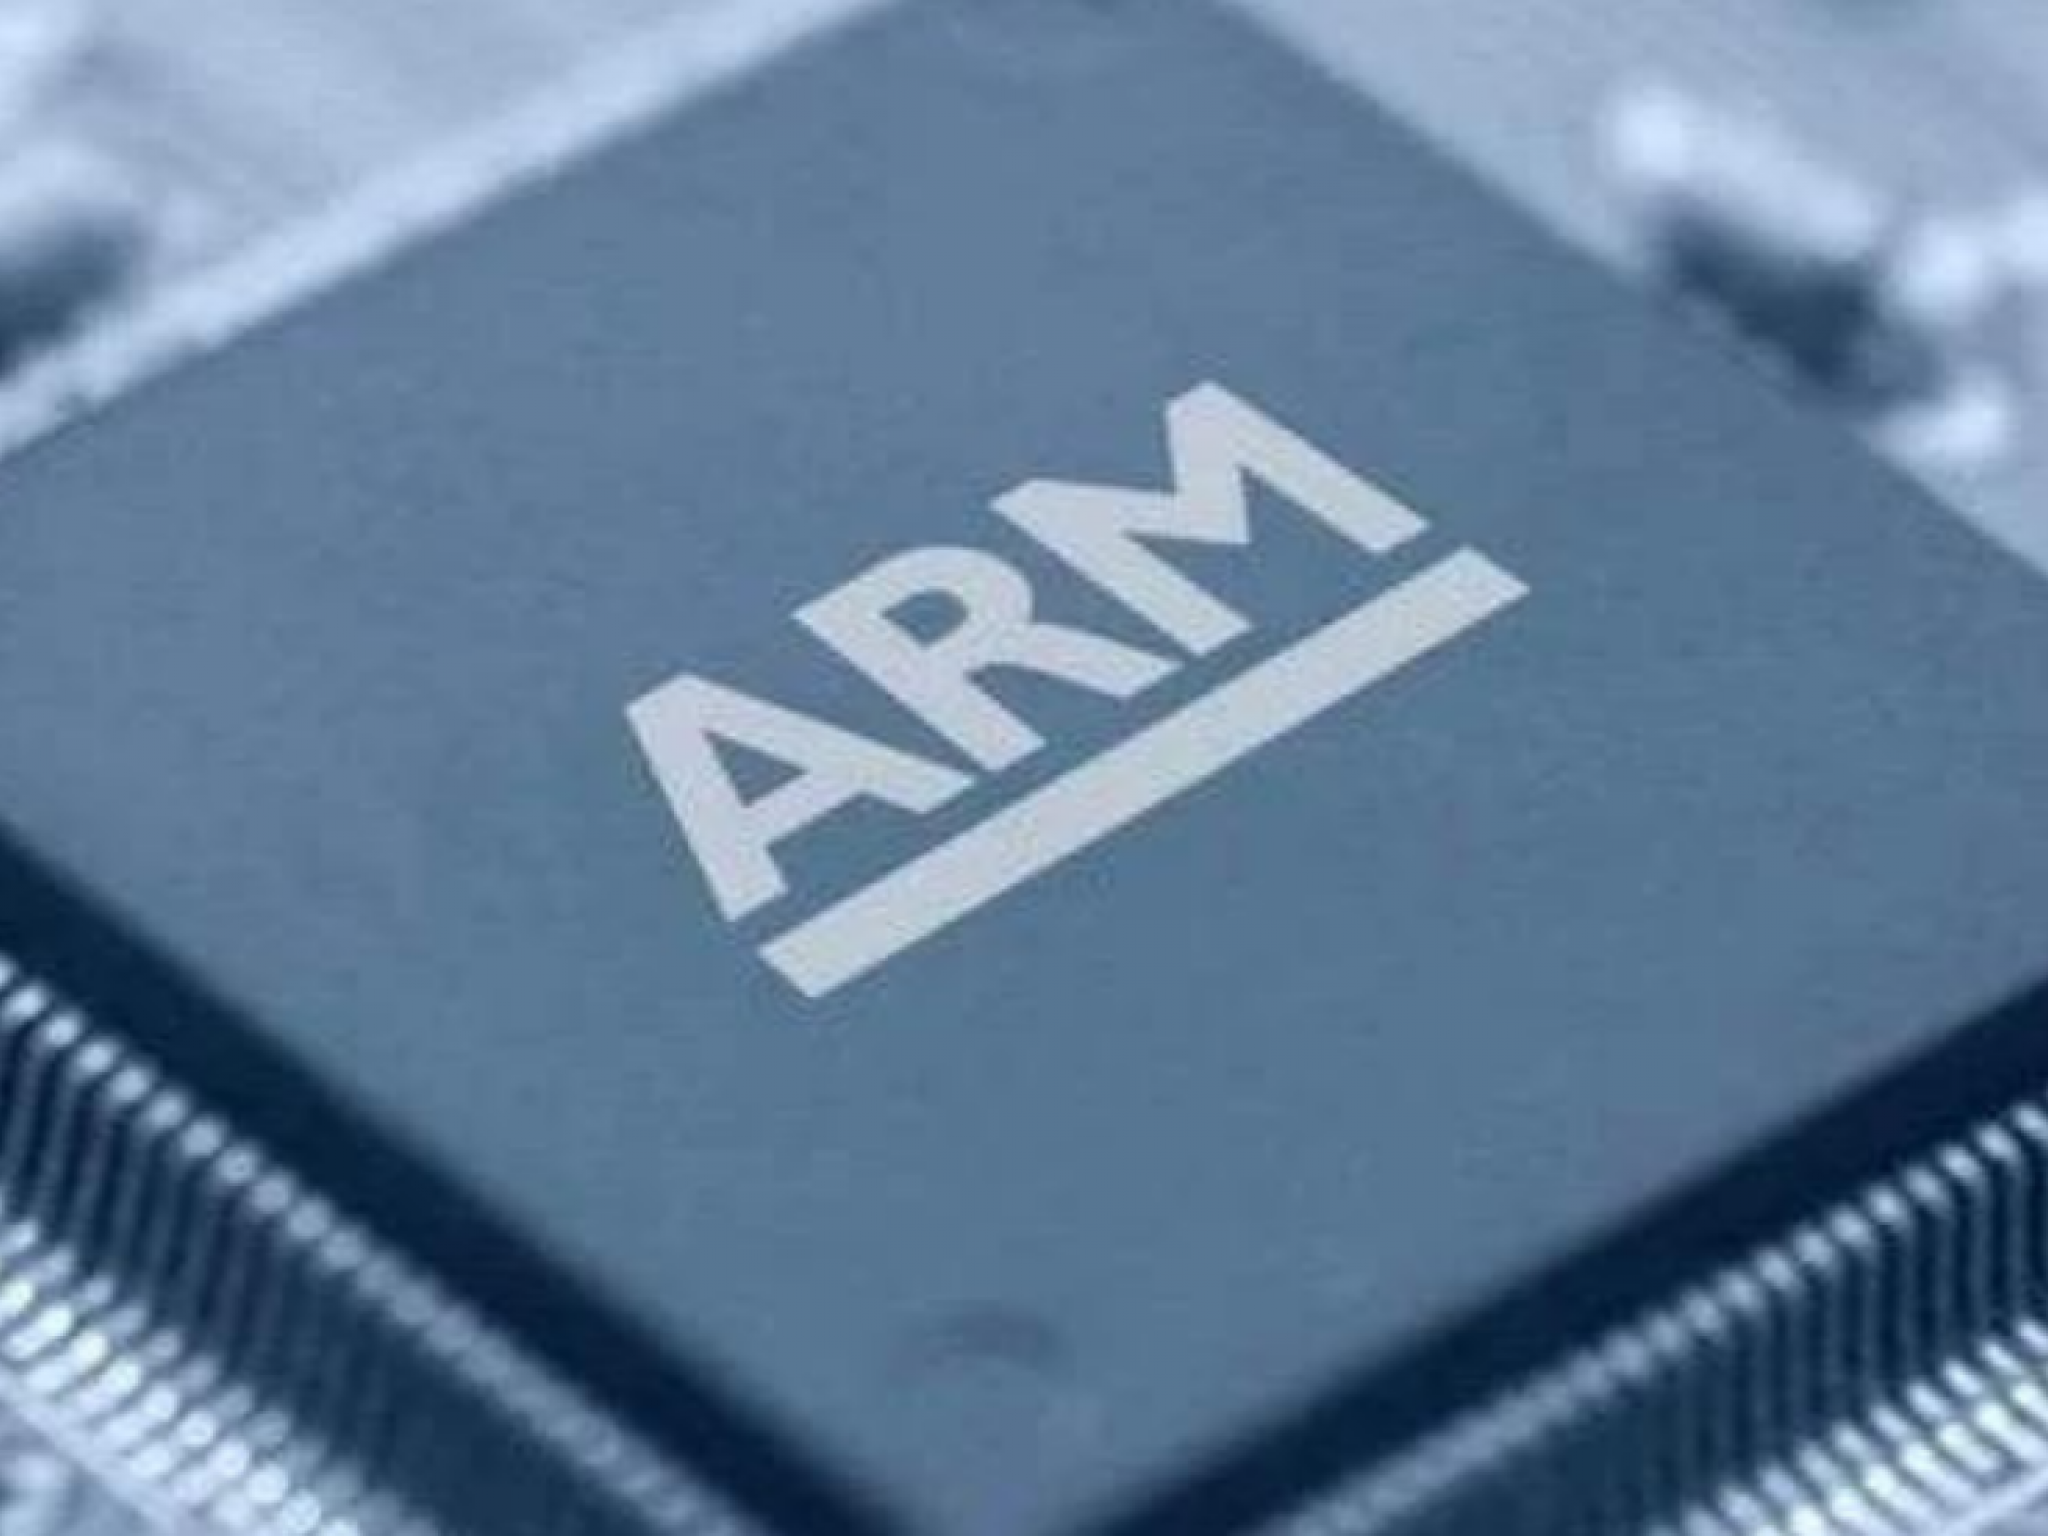  arm-holdings-gears-up-for-ai-foray-with-new-chip-division-launching-next-year 